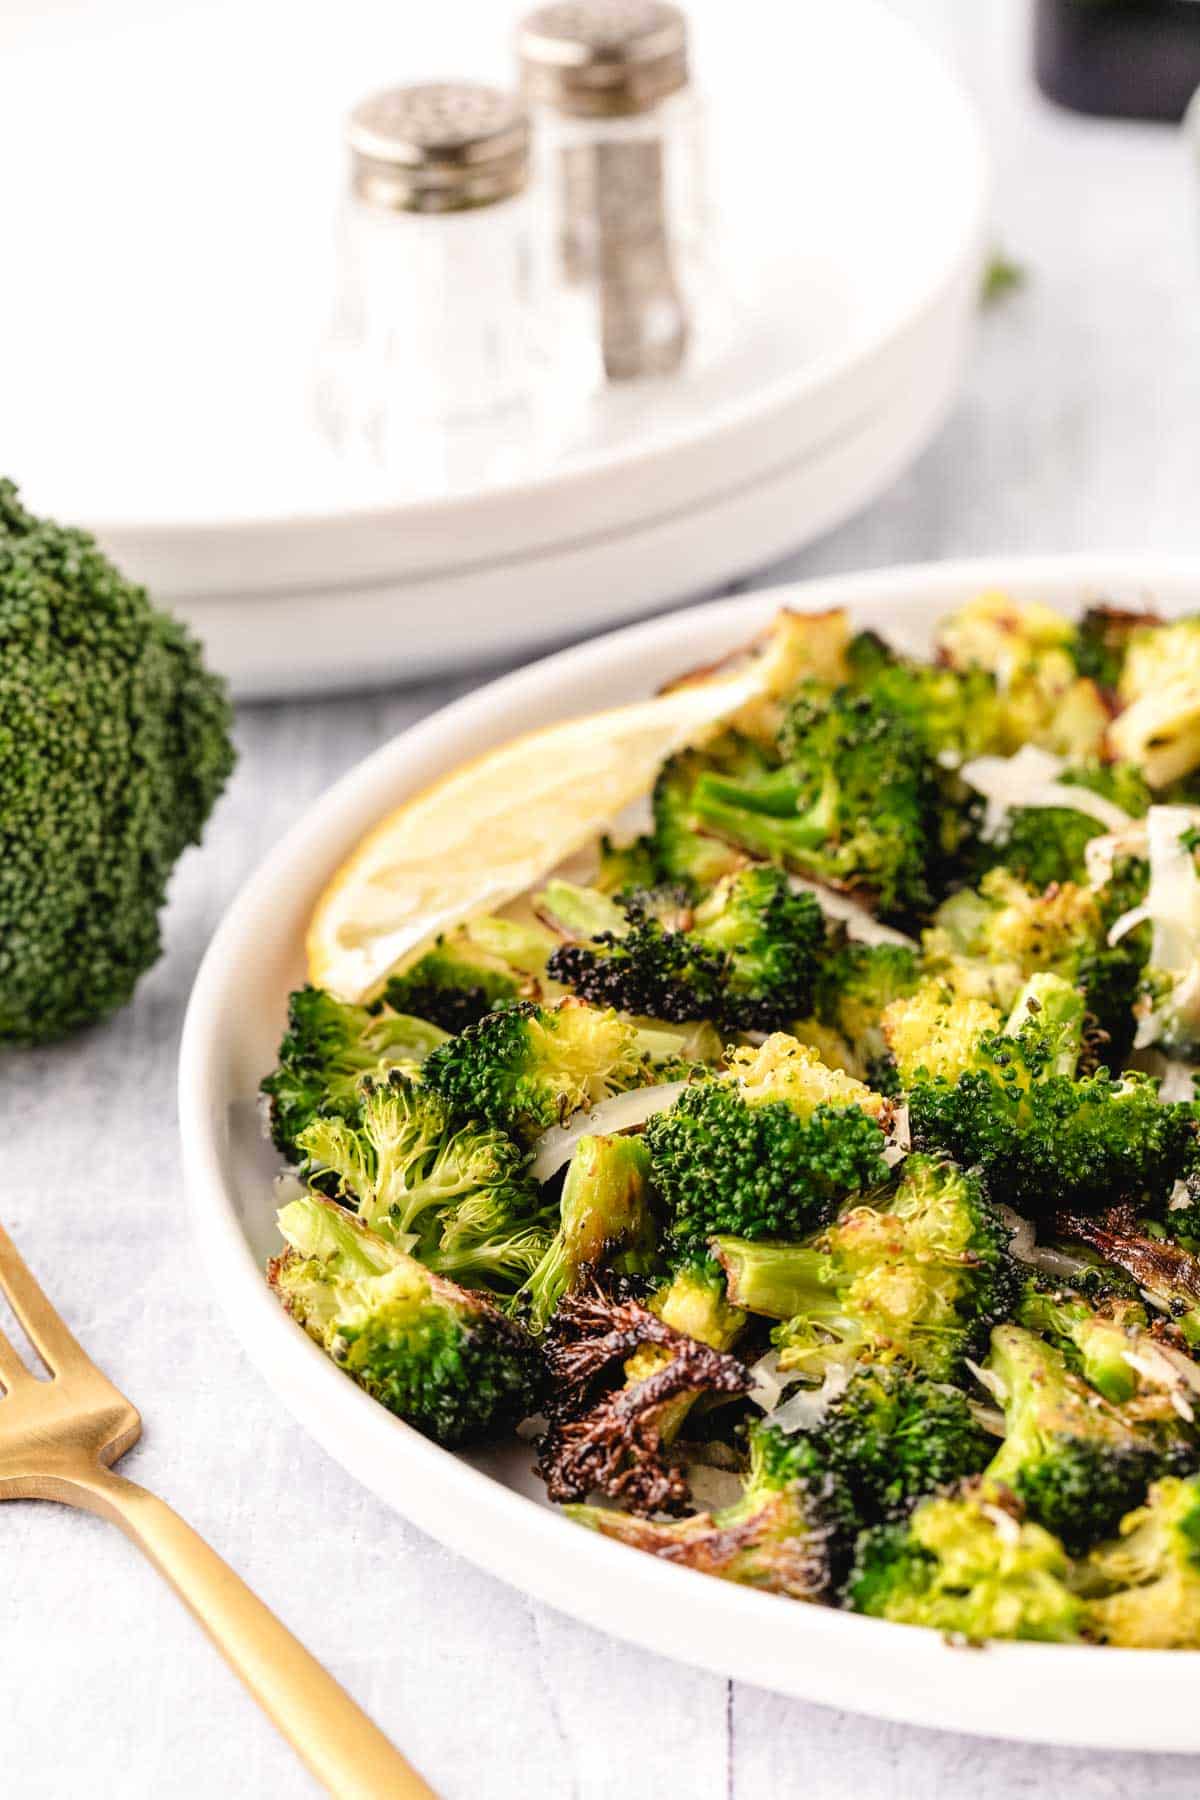 A white dinner plate with roasted broccoli and a wedge of lemon.